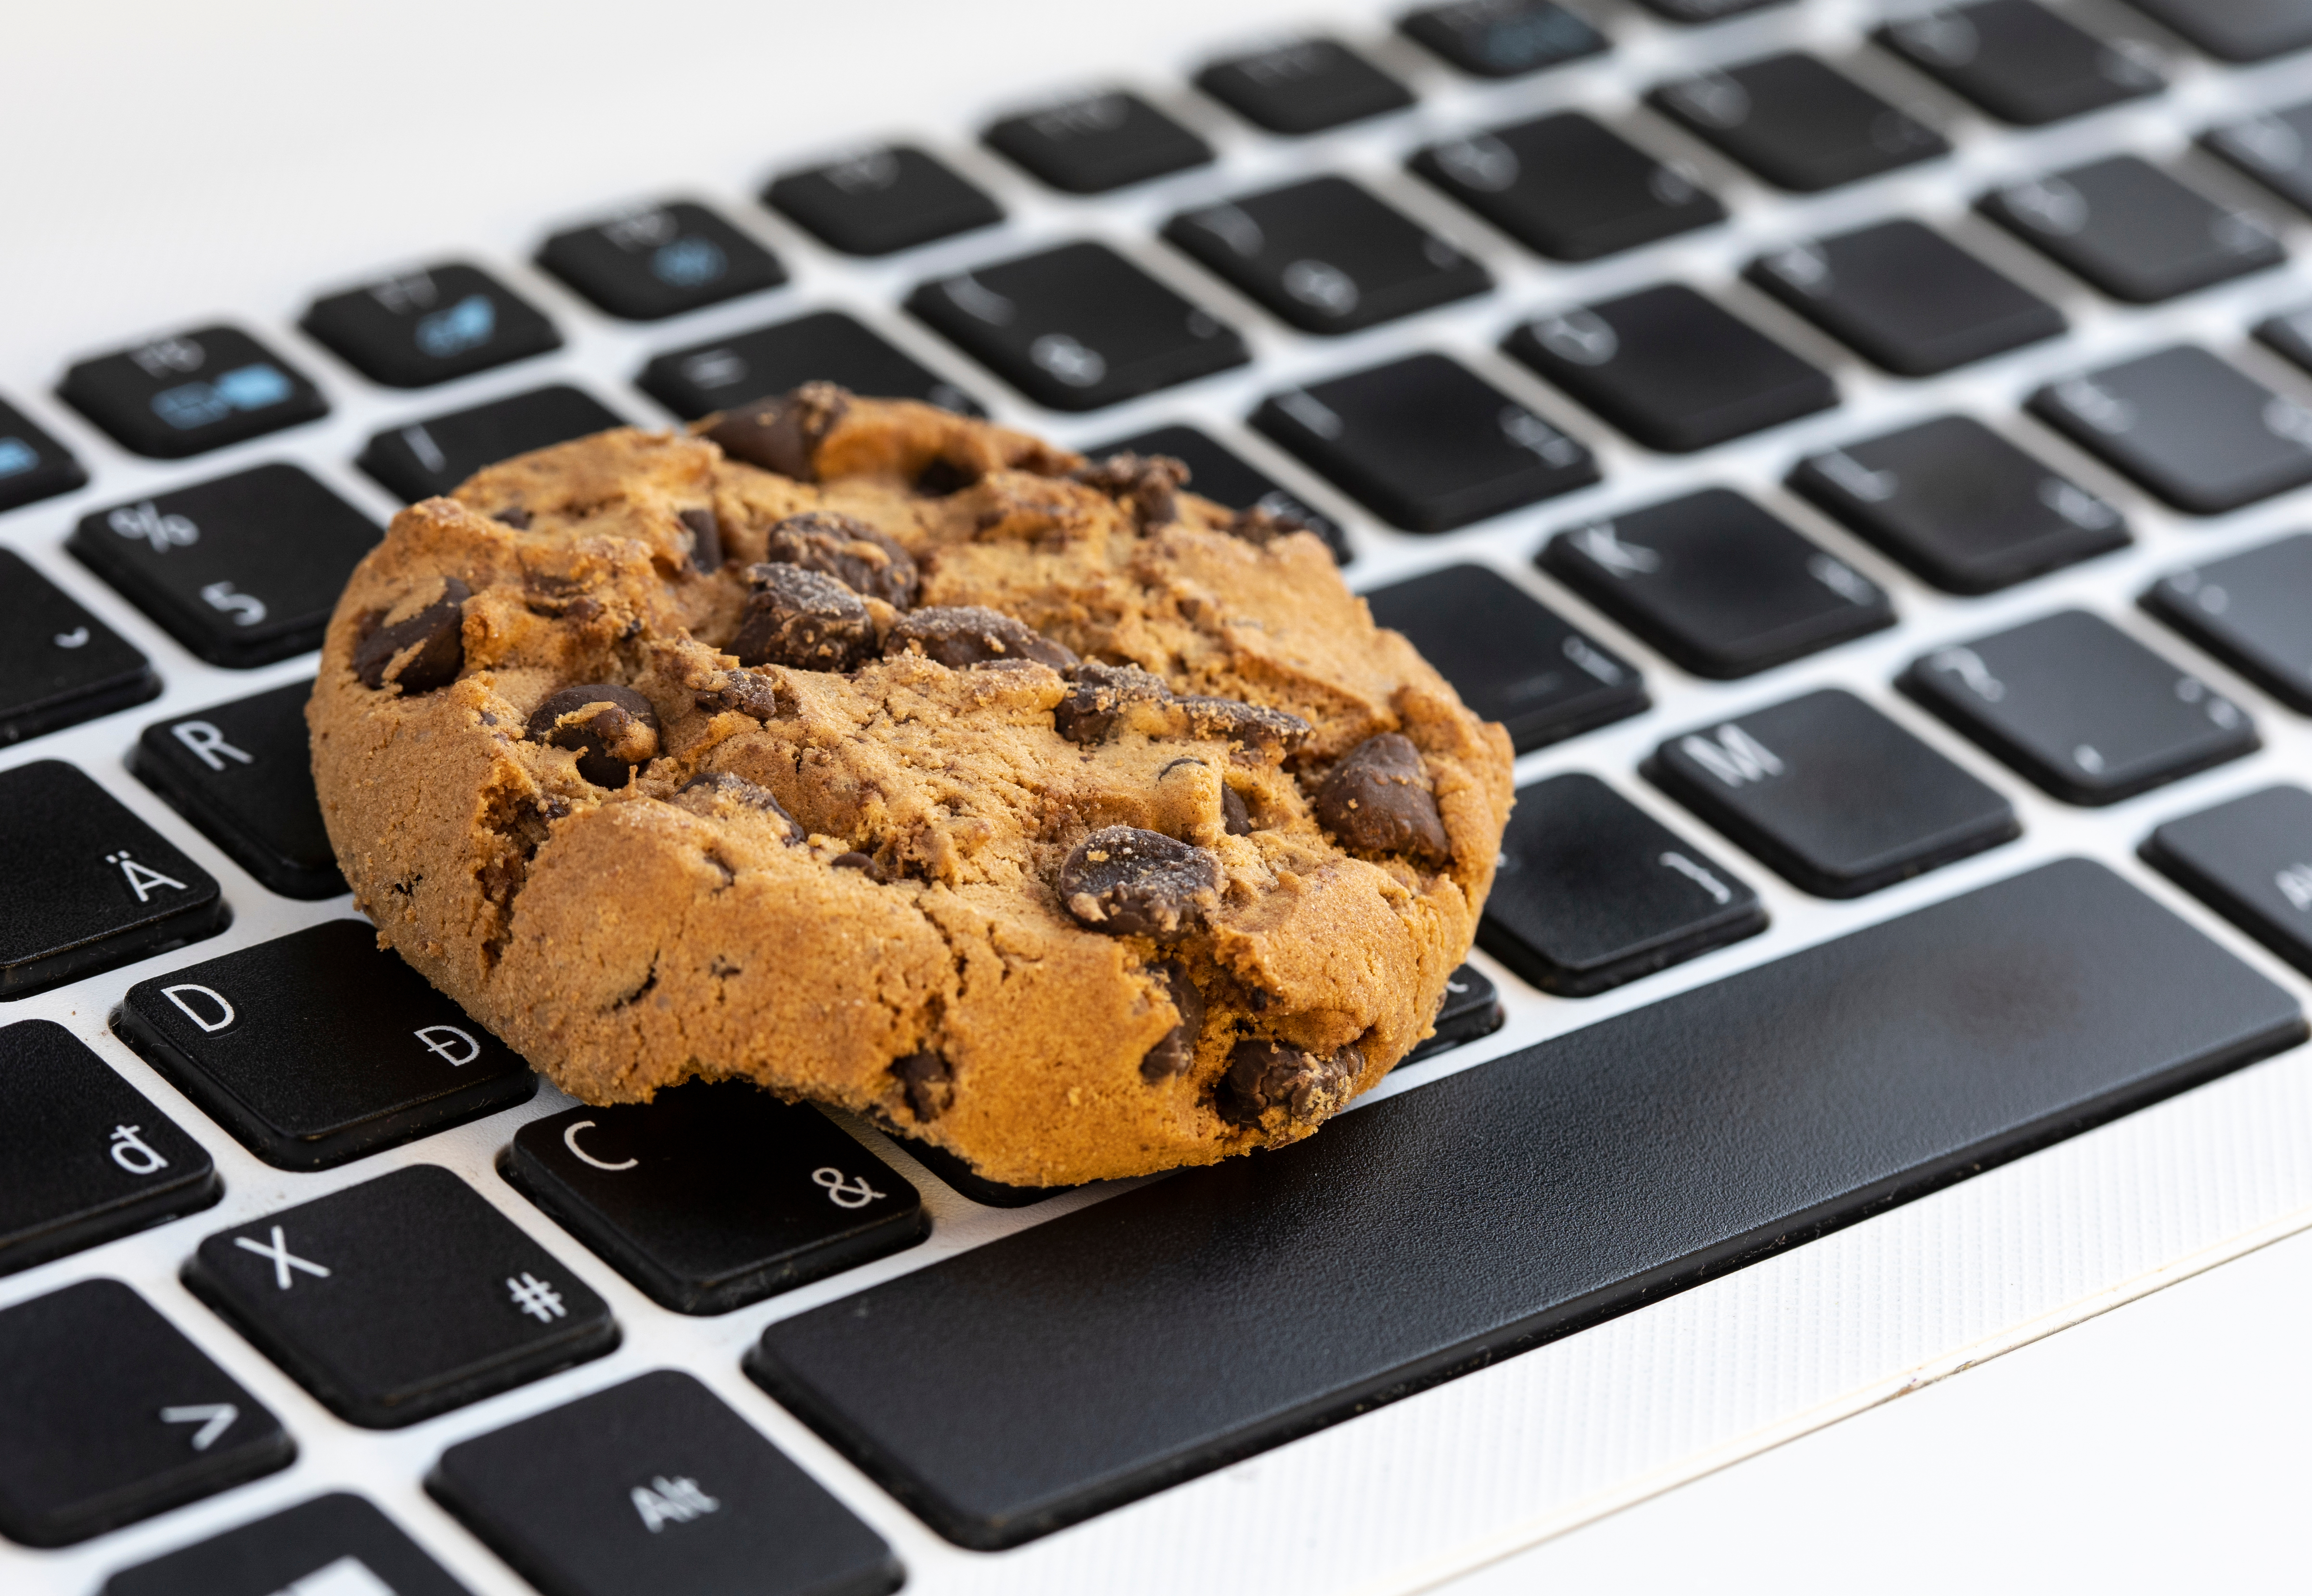 Don't Cry Over Spilled Milk… A Cookie-Less Digital World Isn't Such a Bad Thing